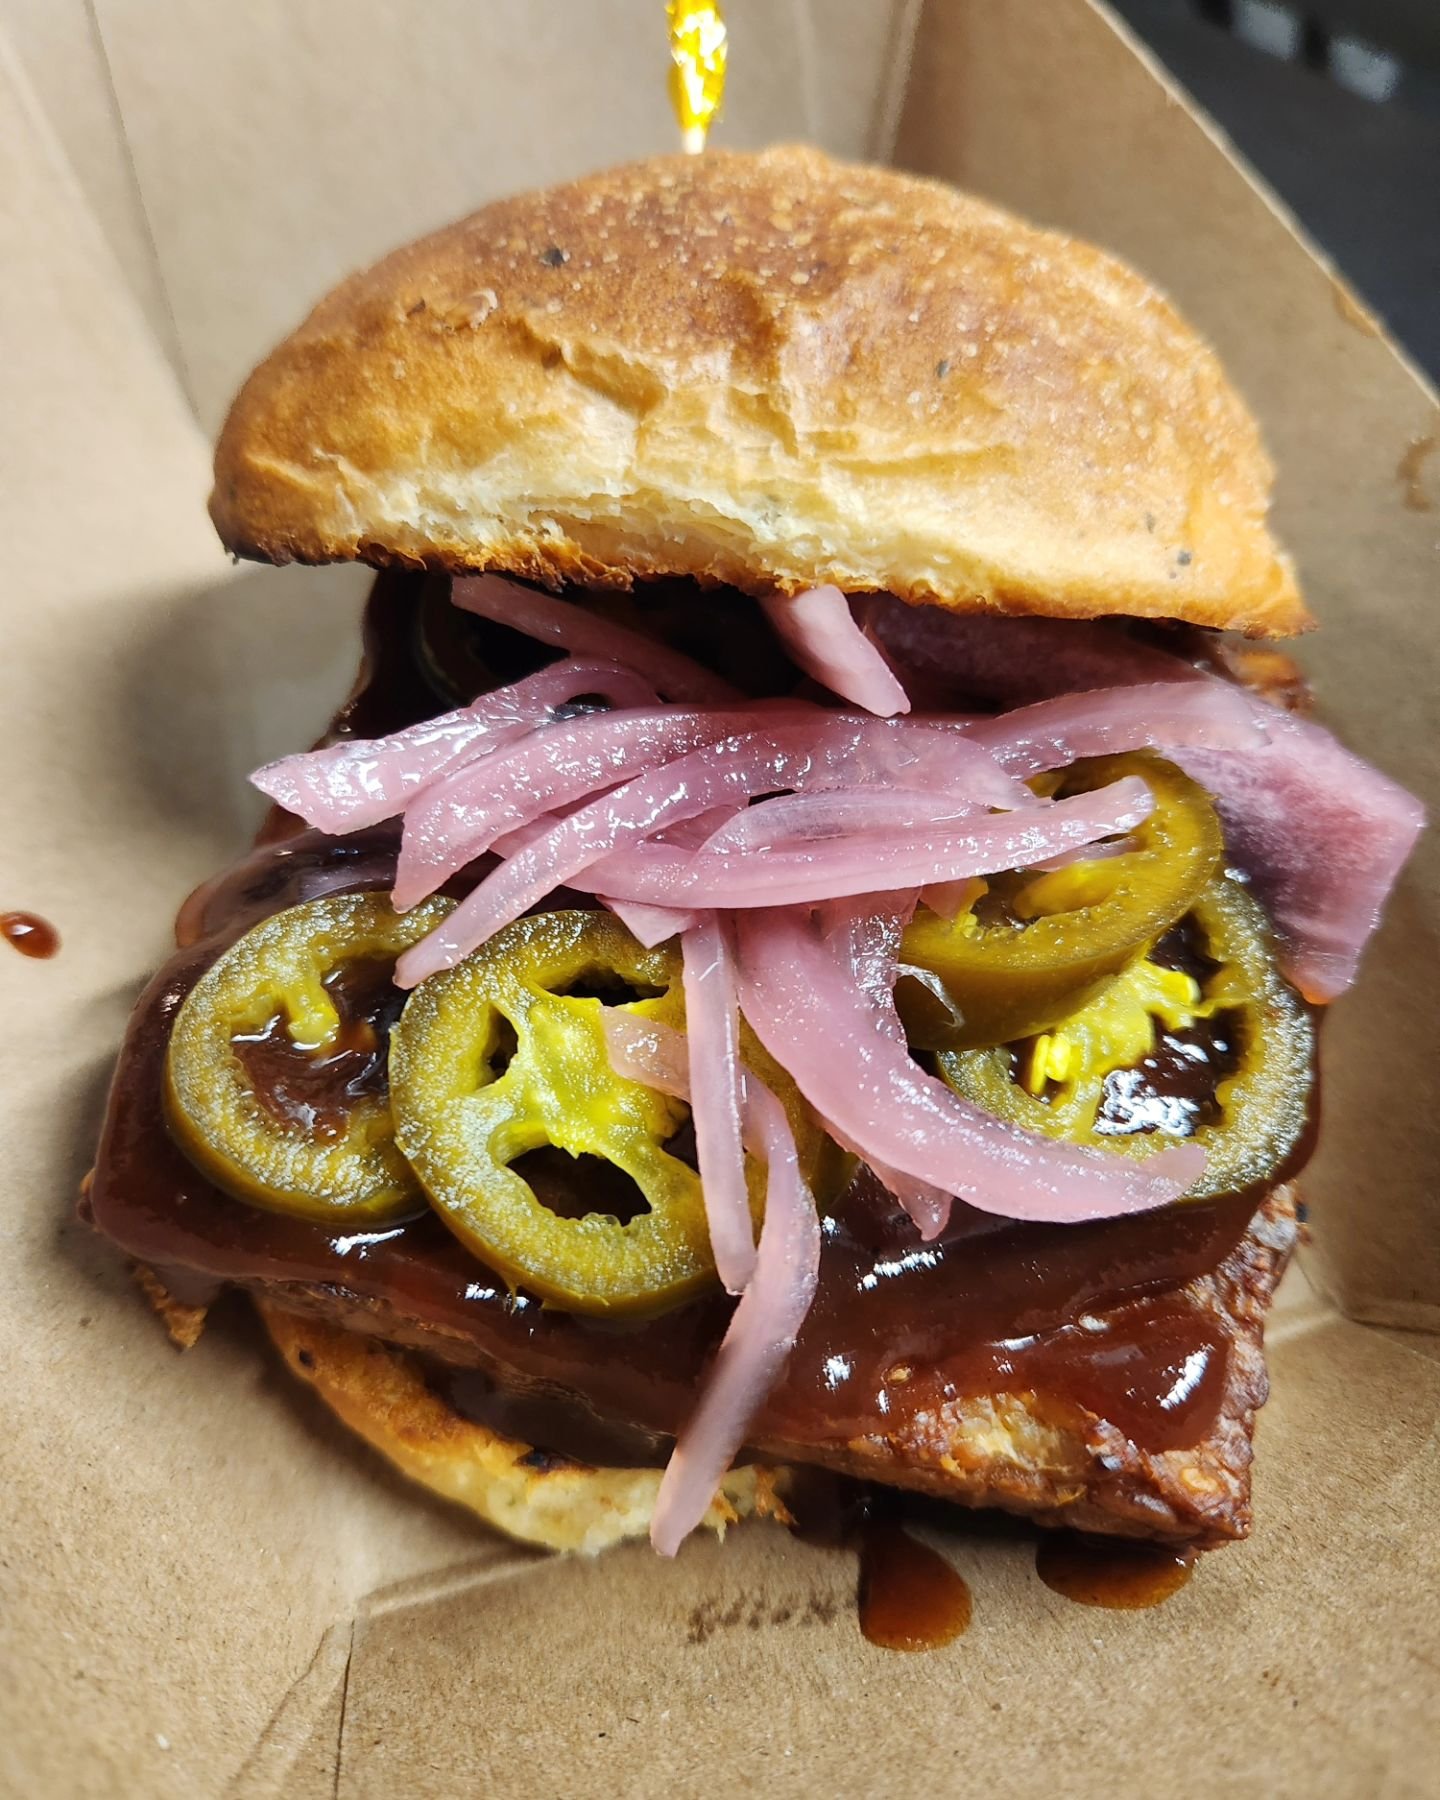 Our fully Vegan Barbecue Sandwich is so good you don't have to be vegan to eat it! Or you could go full carnivore for our Bobs Burger. Either way, you're having a good time!

We'll be at Purpose Brewing tonight, May 7th, from 5:30-8:30!